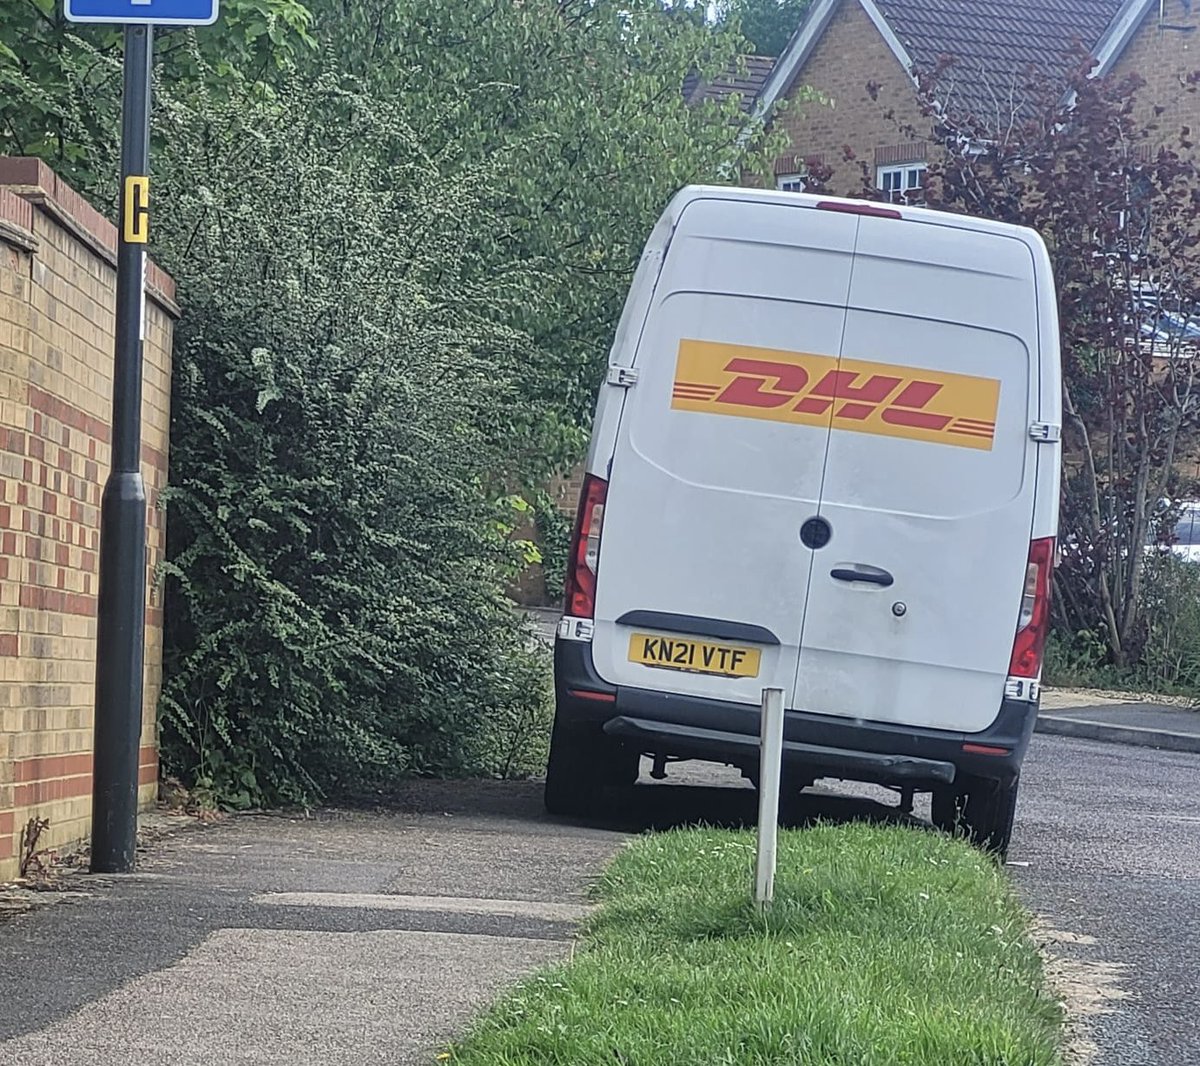 Amazing parking by one of your vans @DHLGlobal @dhlexpressuk been there since last night and completely blocking the footpath. Can you get this moved please as it’s causing issues in Crawley West Sussex